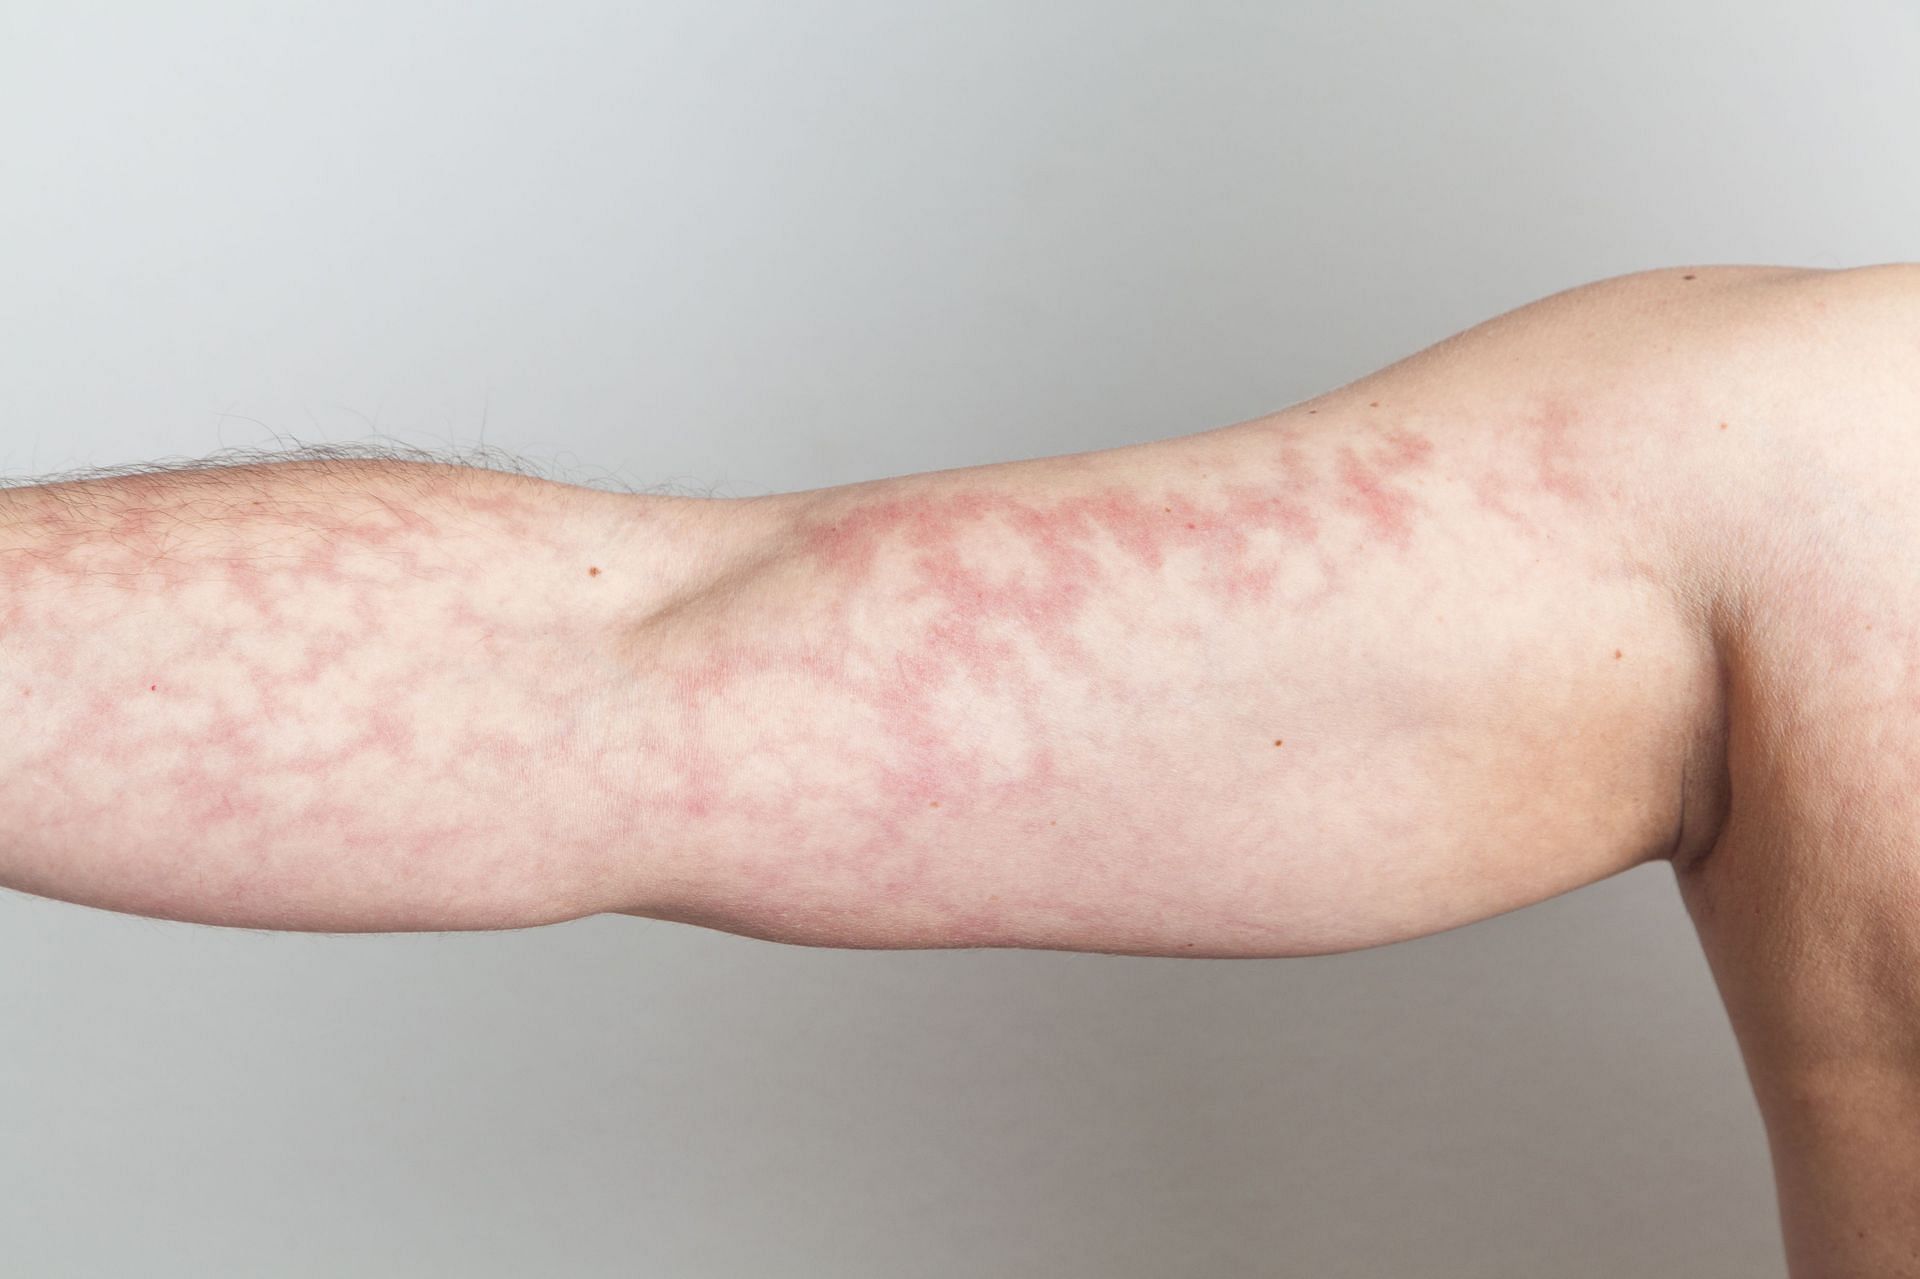 Mottled skin is a disorder that arises when blood flow to the skin is interrupted or restricted, and is characterized by net- or lace-like patterns on the skin